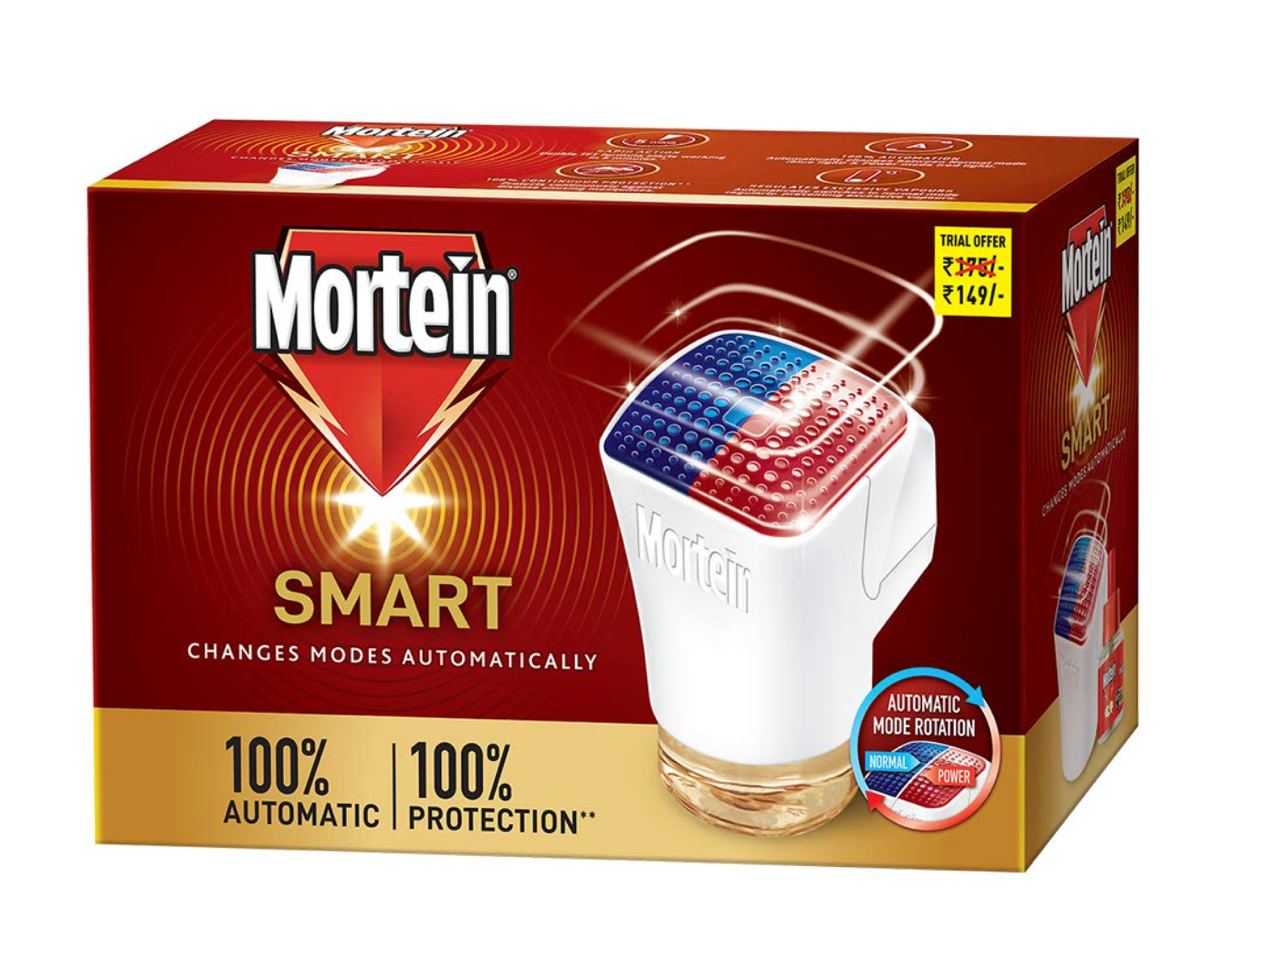 [Useful Deal] Mortein Mosquito Killer Machine & Refill @ Just Rs.89